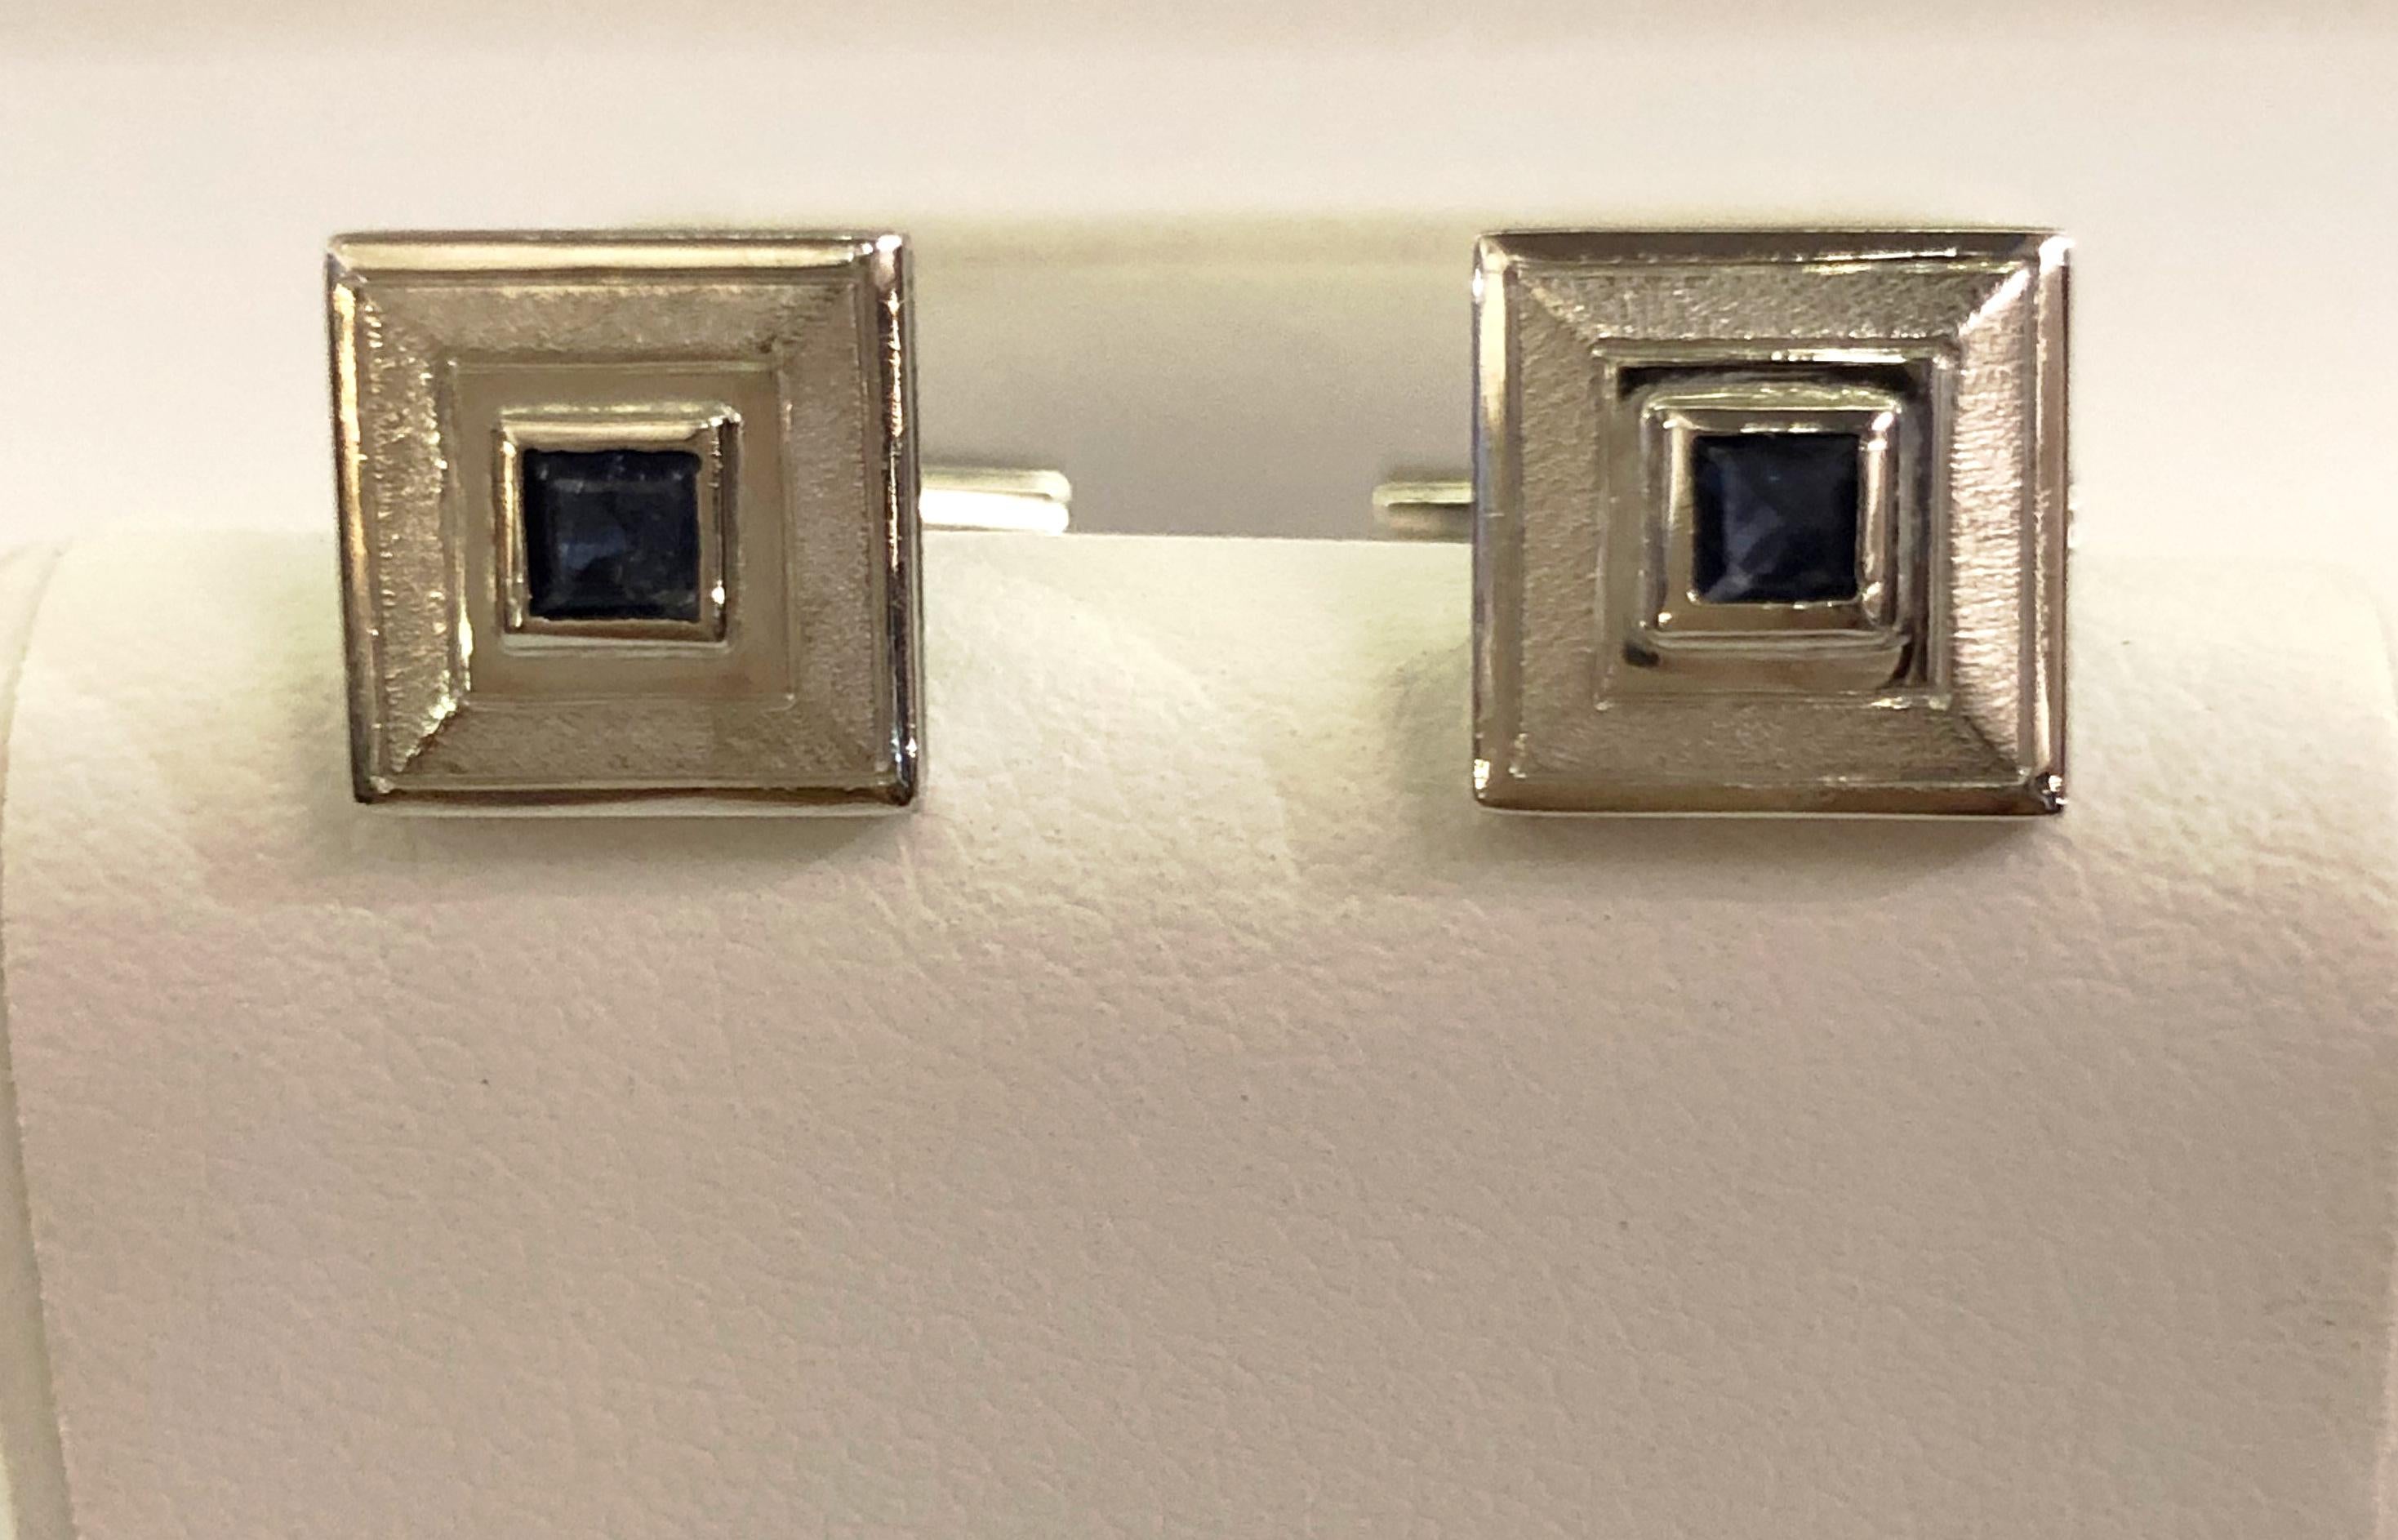 Pair of vintage cufflinks for men with 18 karat white gold and carre sapphires, Italy 1960s
Diameter 0.8cm